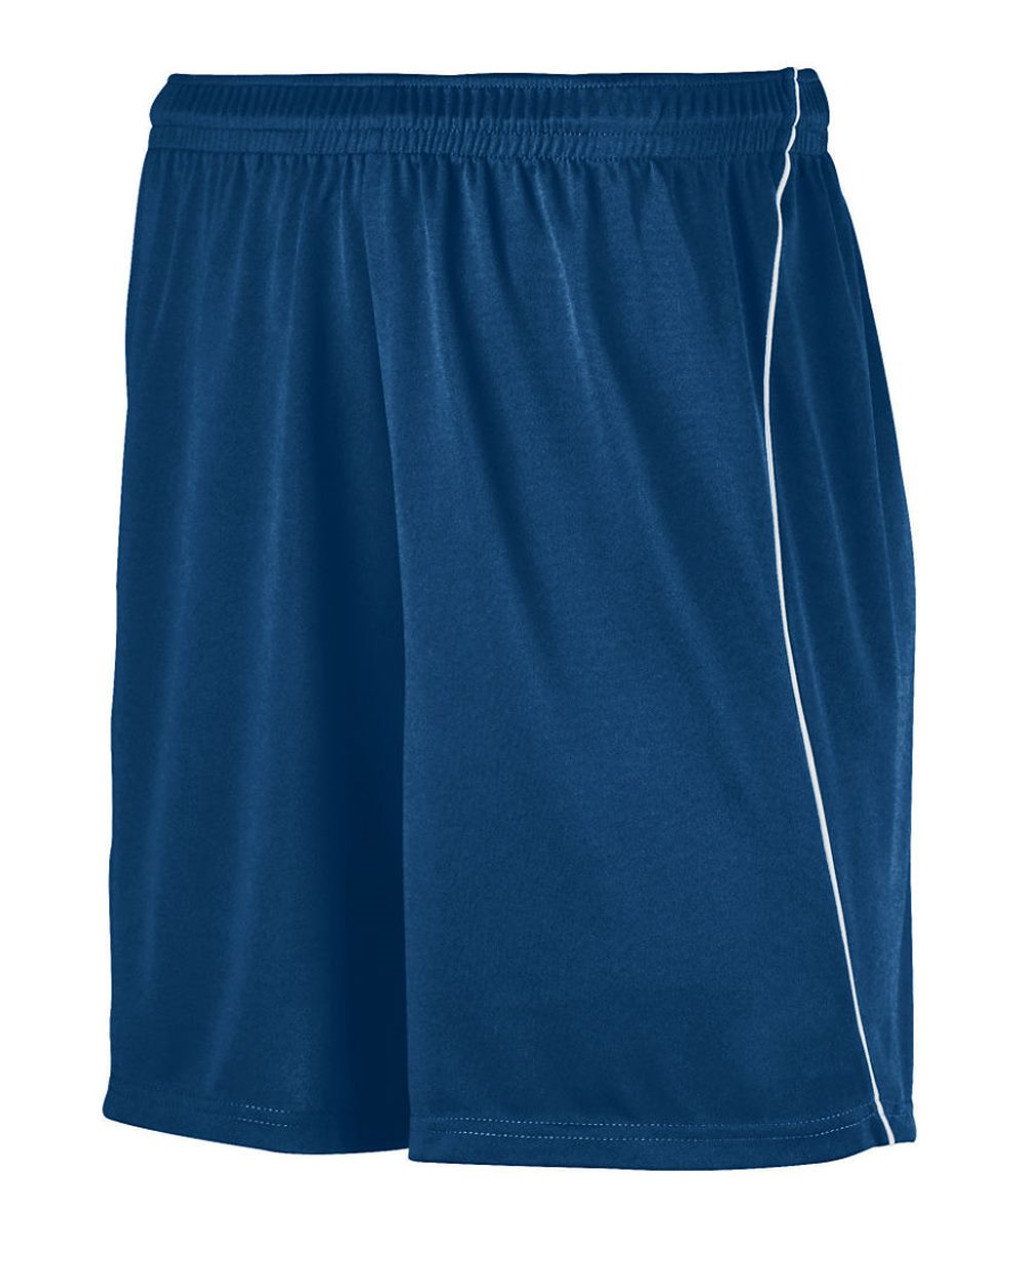 Custom Youth Wicking Soccer Shorts with Piping - 461